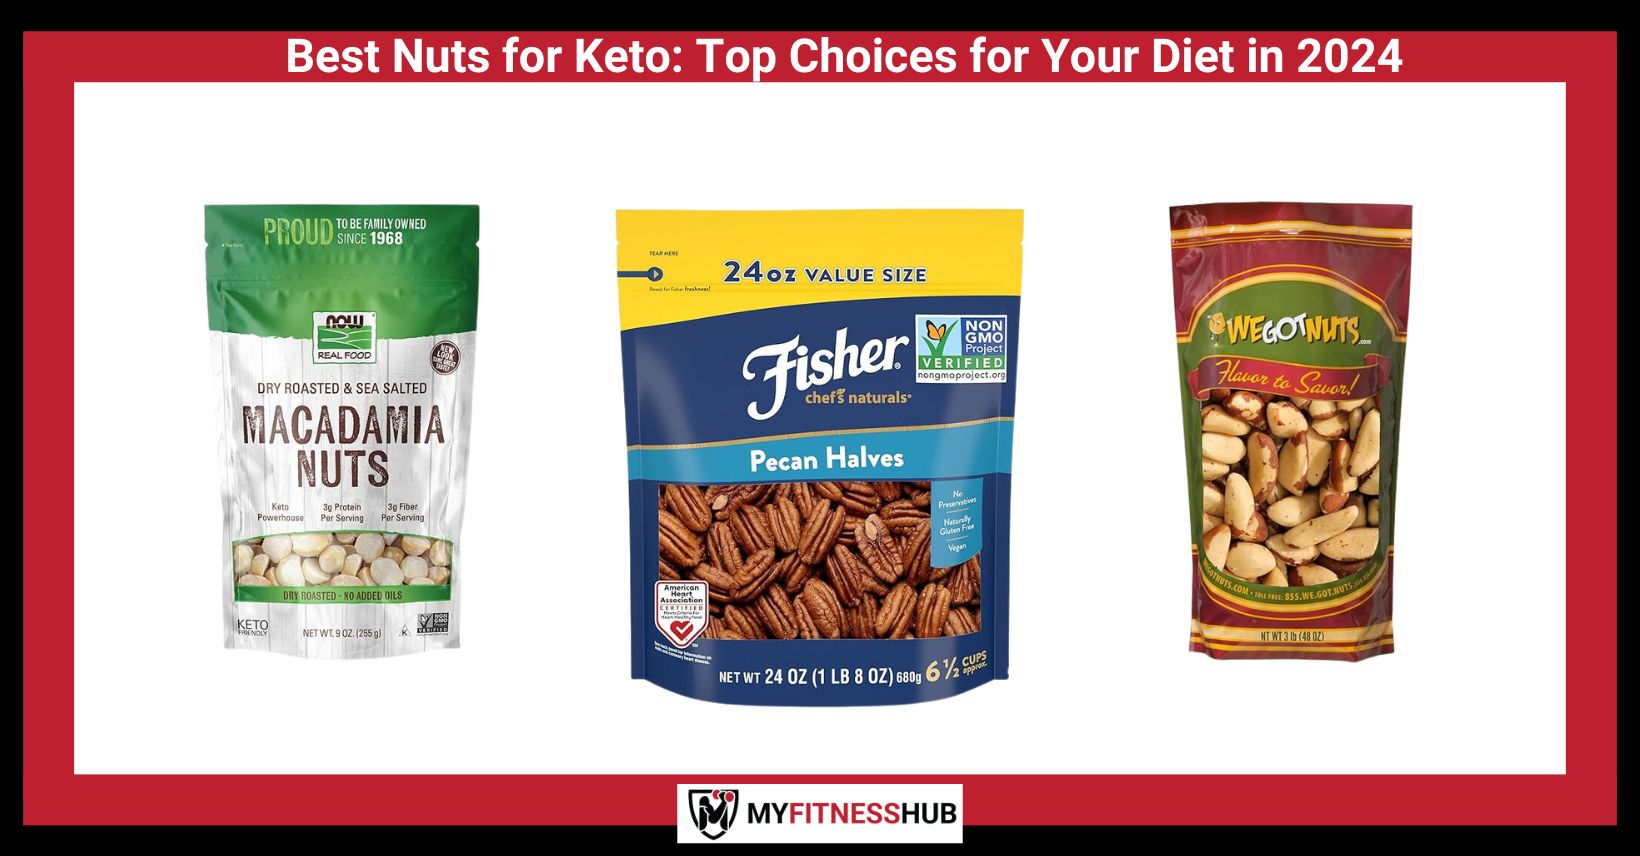 THE BEST NUTS FOR KETO IN 2024